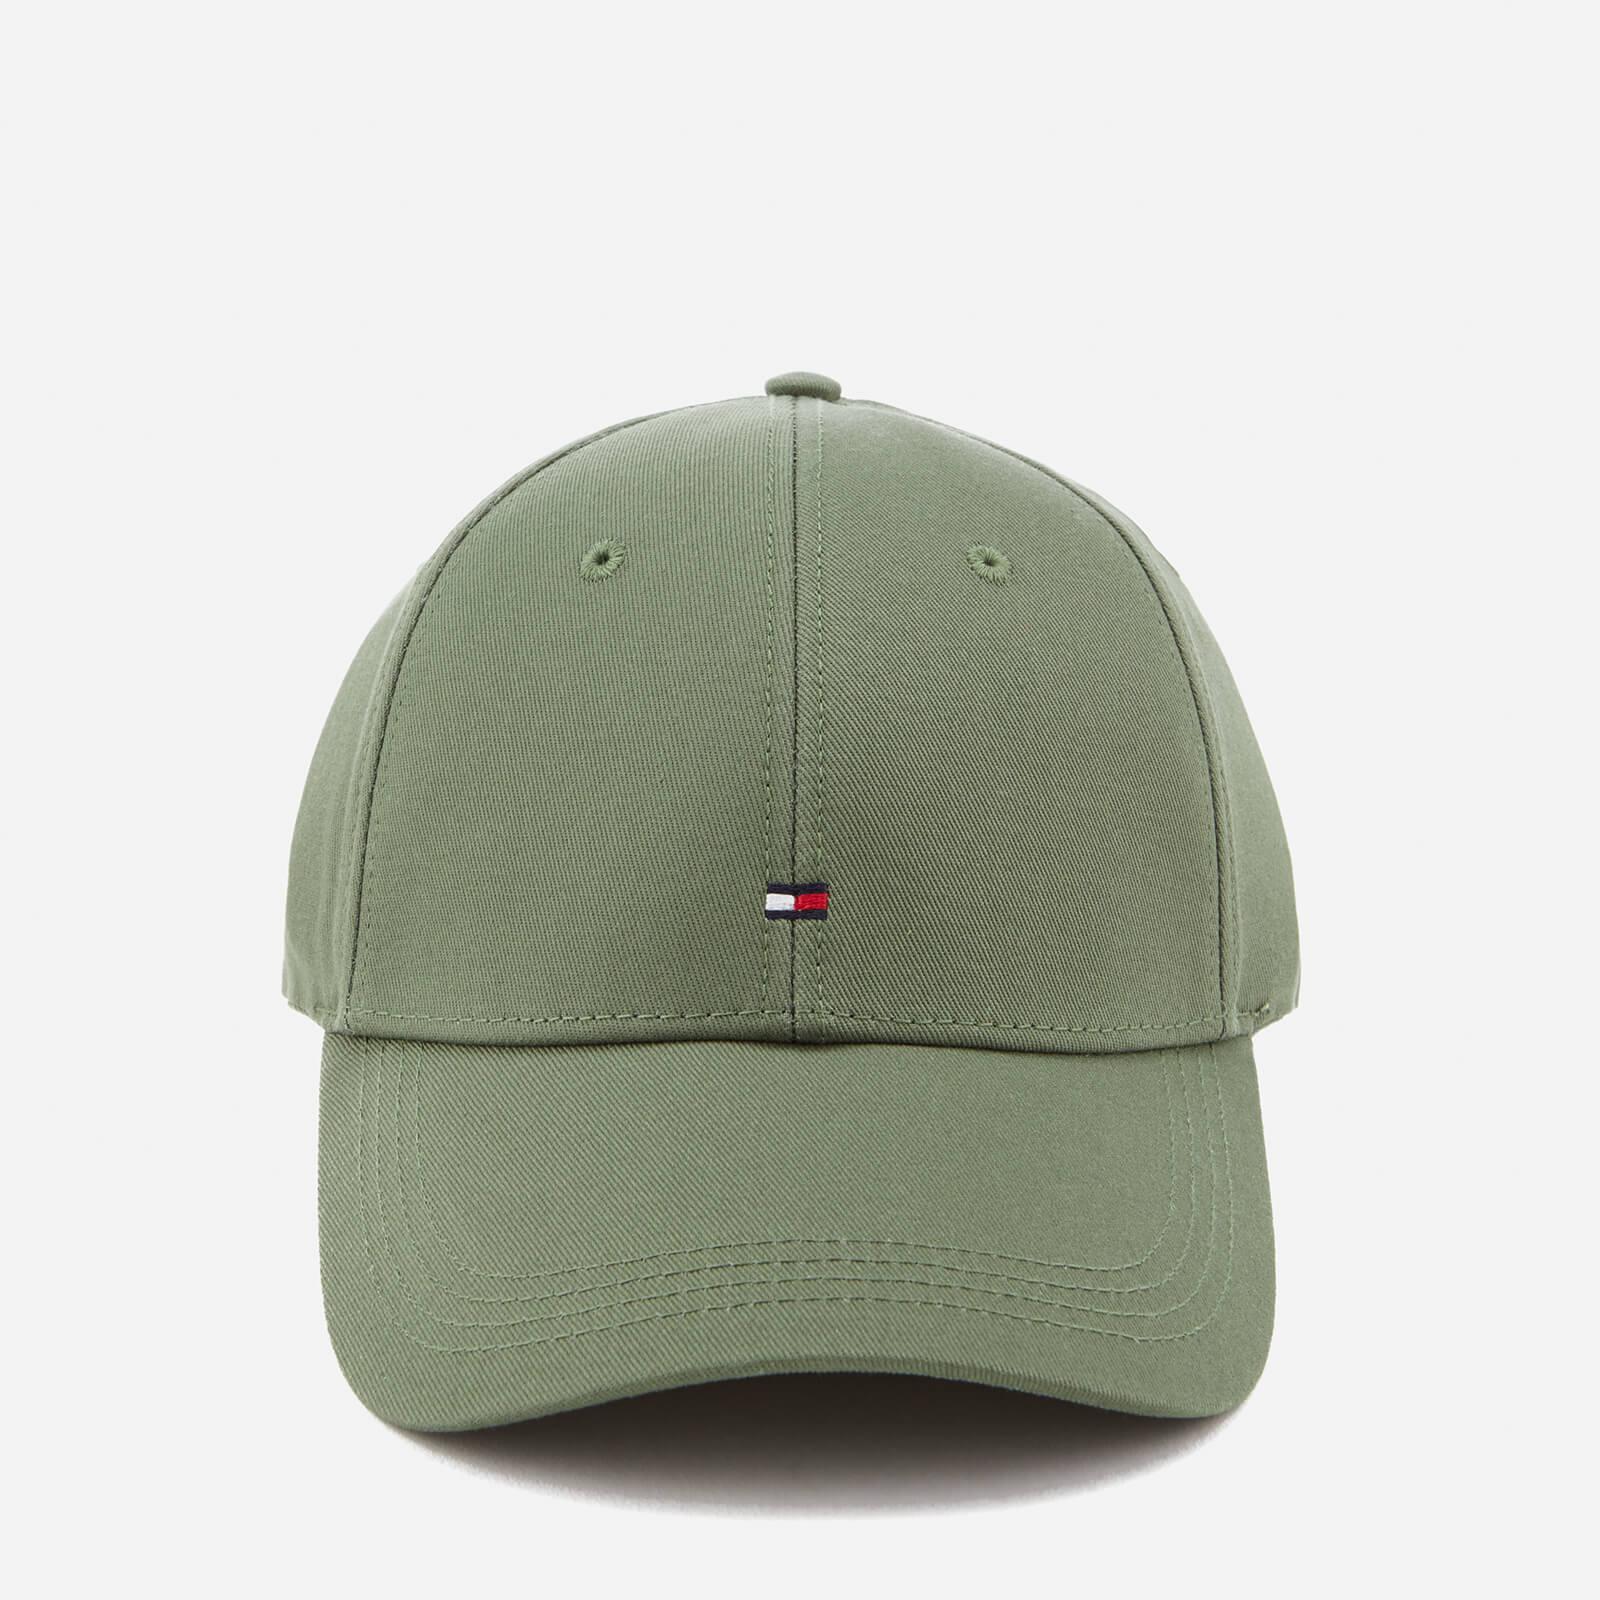 Tommy Hilfiger Cotton Bb Cap in Green for Men - Lyst